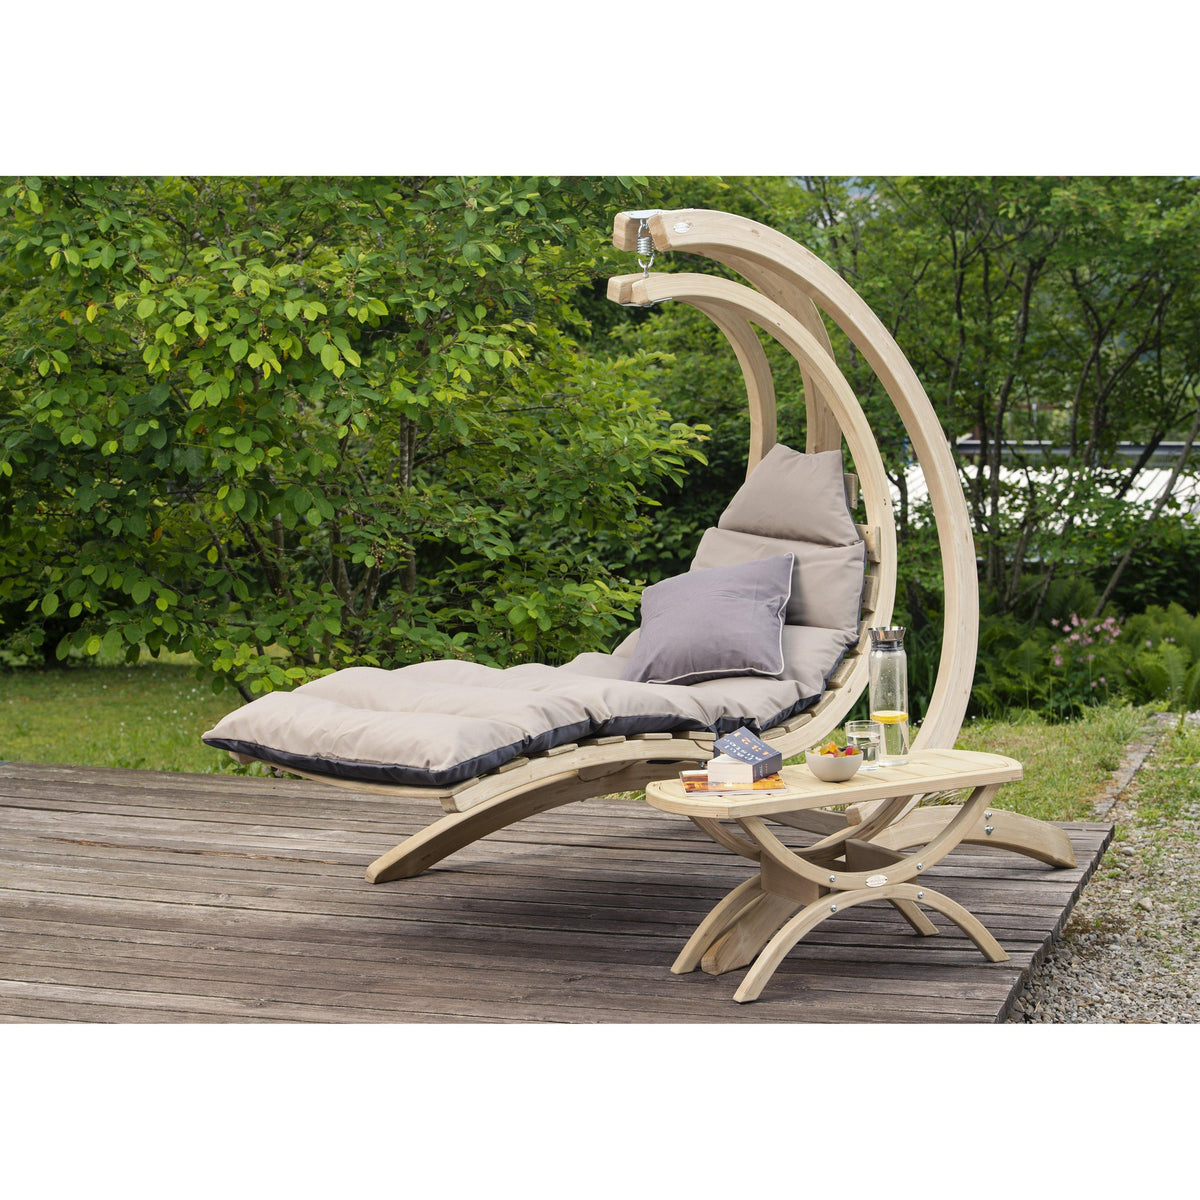 Swing Lounger, from Byer of Maine